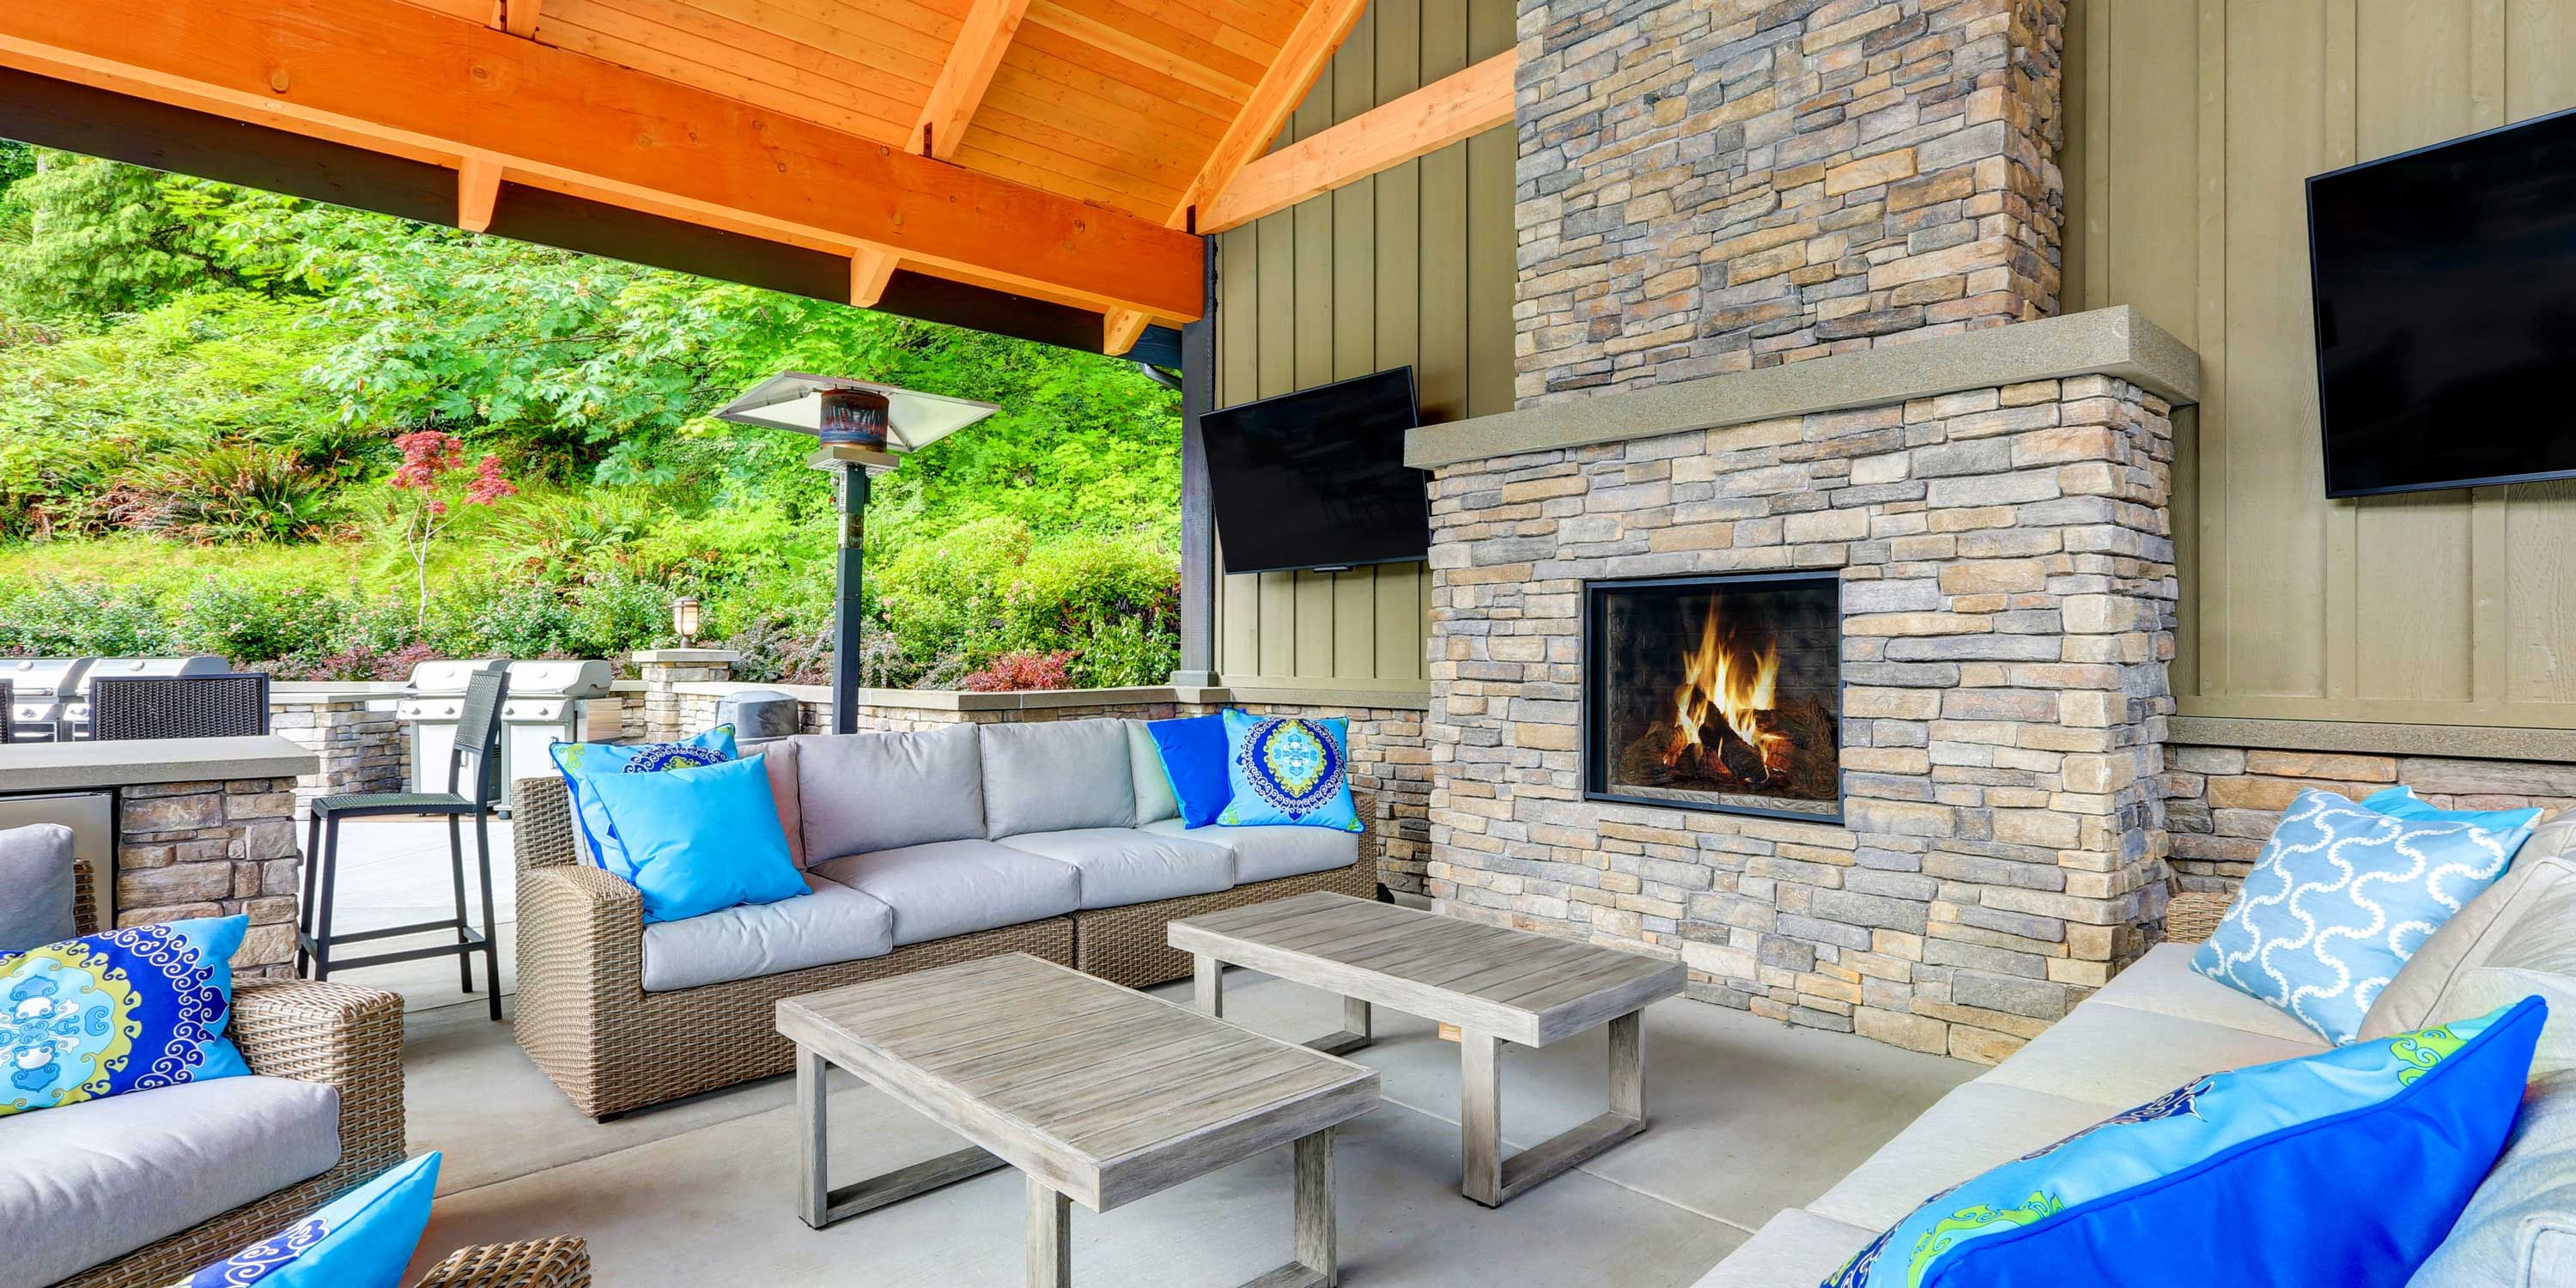 outdoor patio area with blue pillows on a grey couch